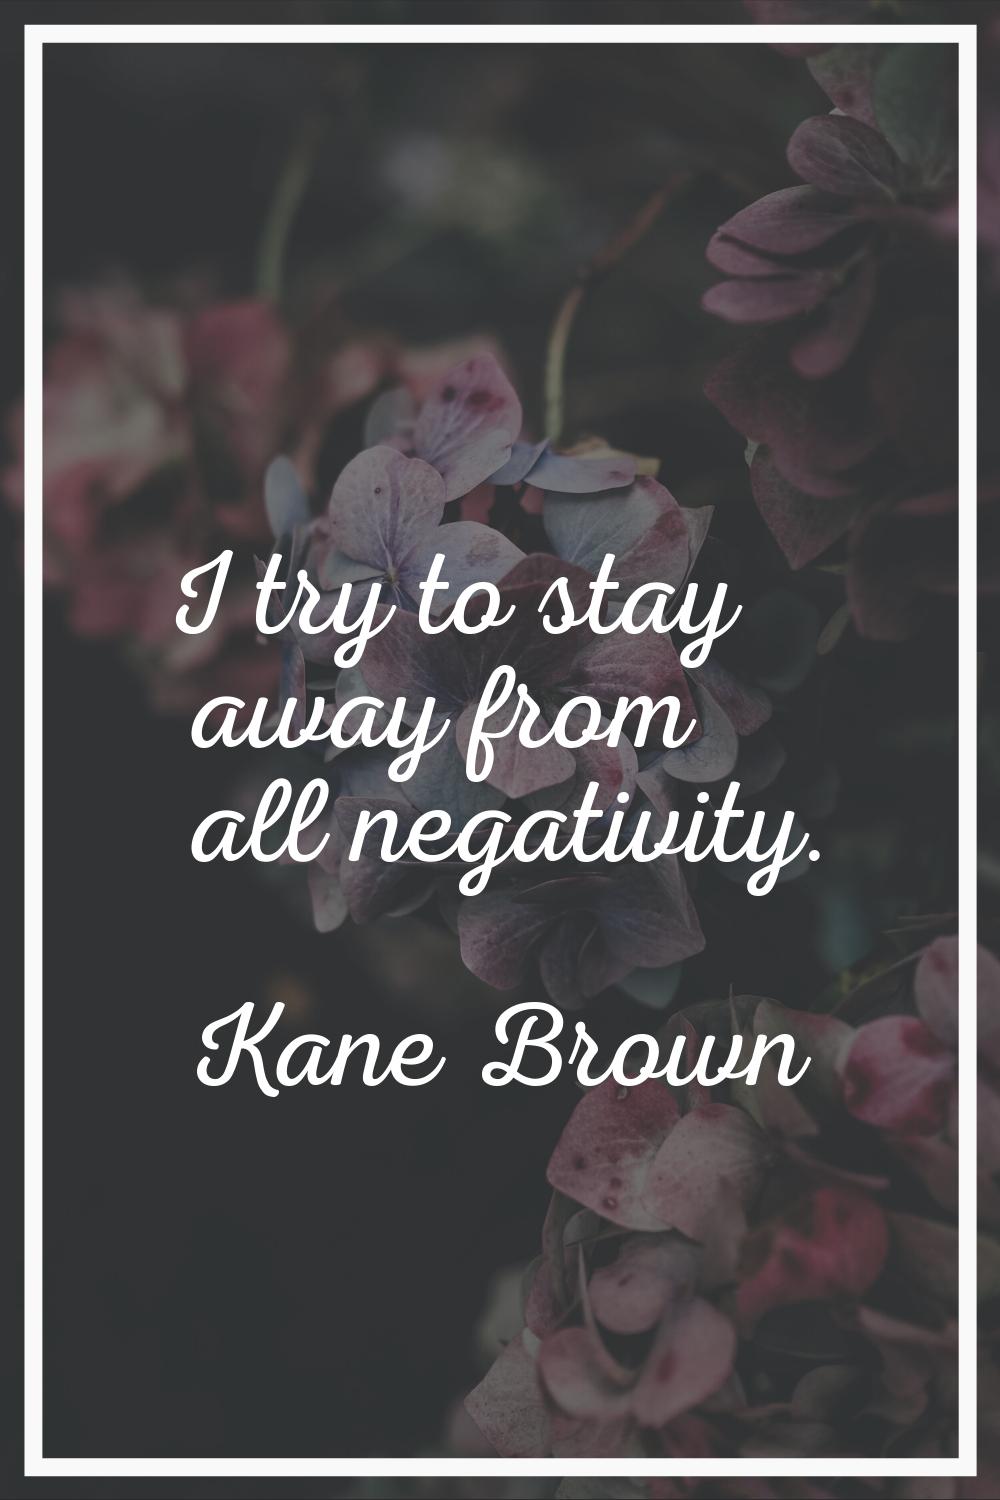 I try to stay away from all negativity.